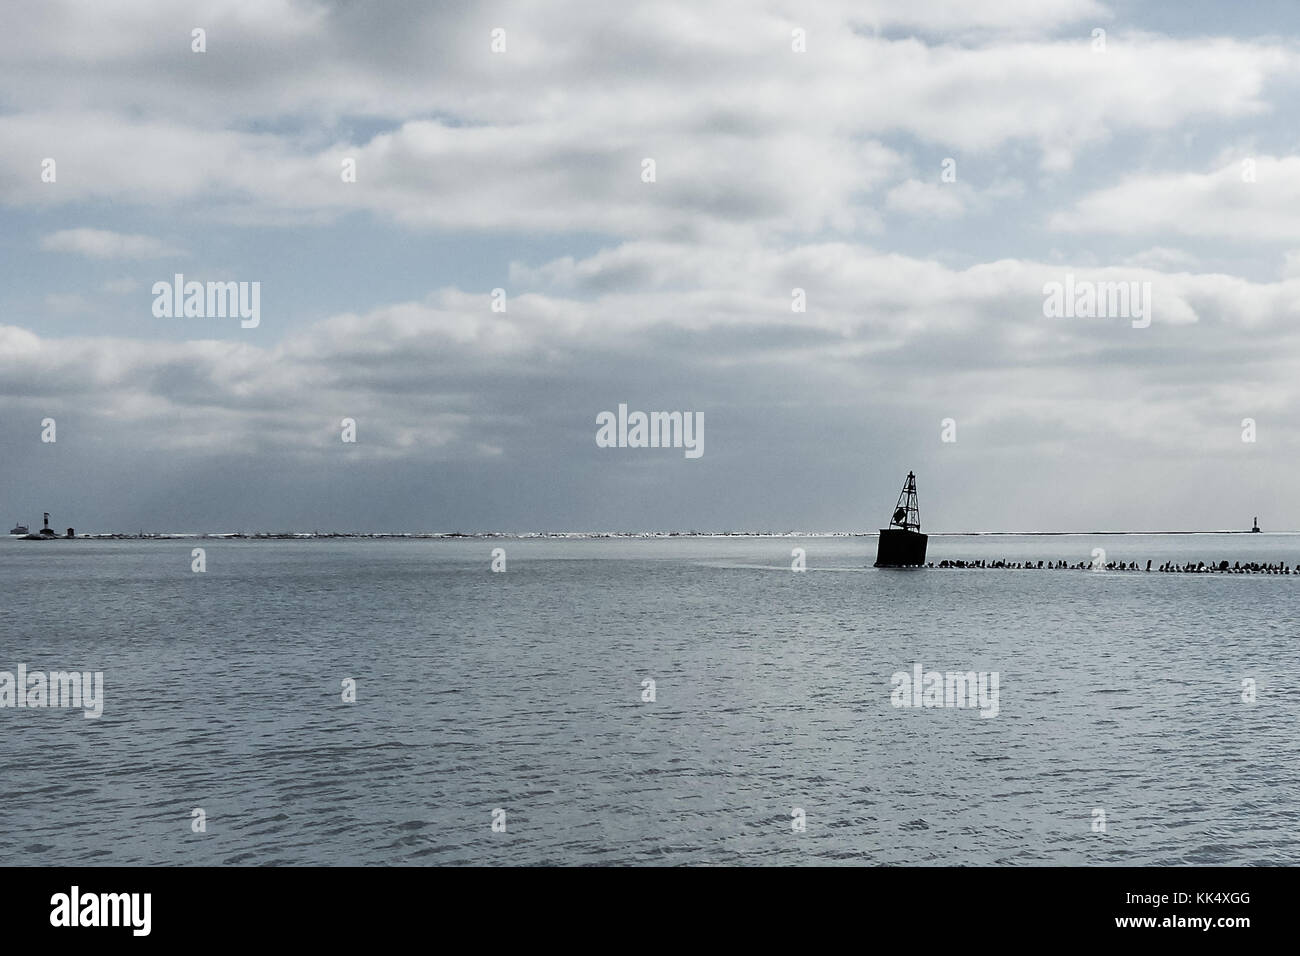 cold winter view of Lake Michigan, clouded sky, horizon over water with breakwater in distance Stock Photo